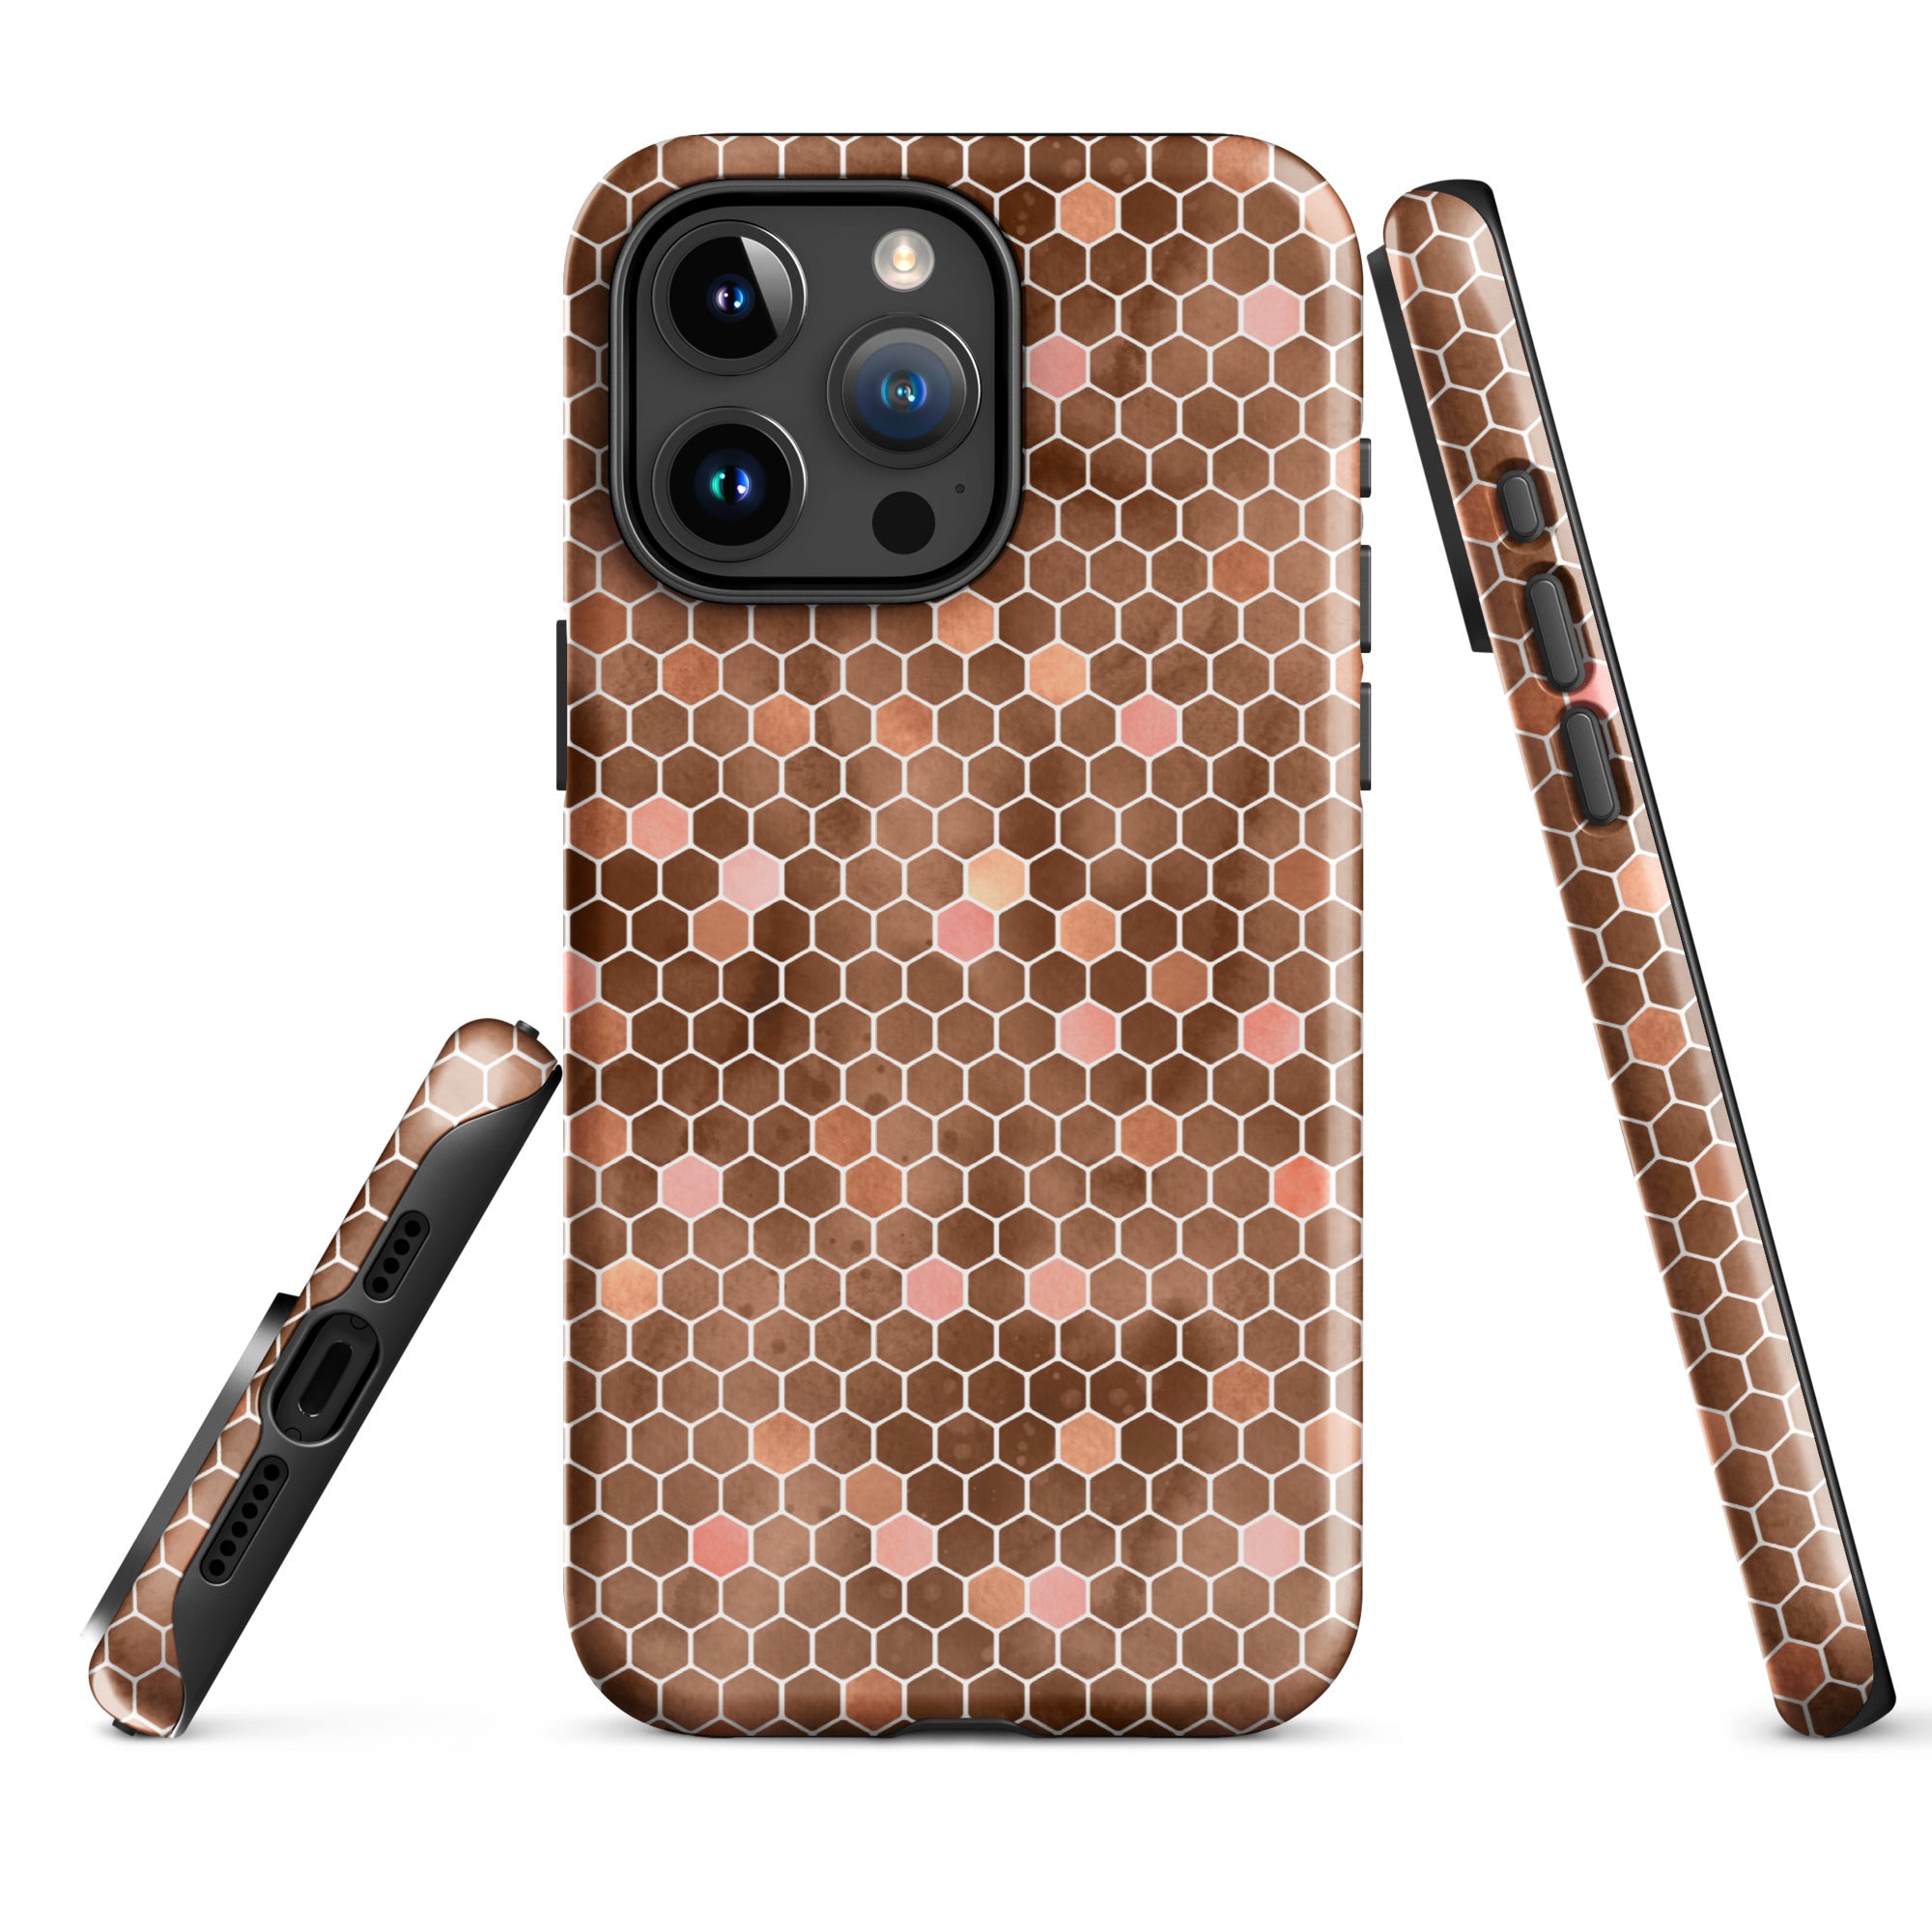 Tough Case for iPhone - Honeycomb